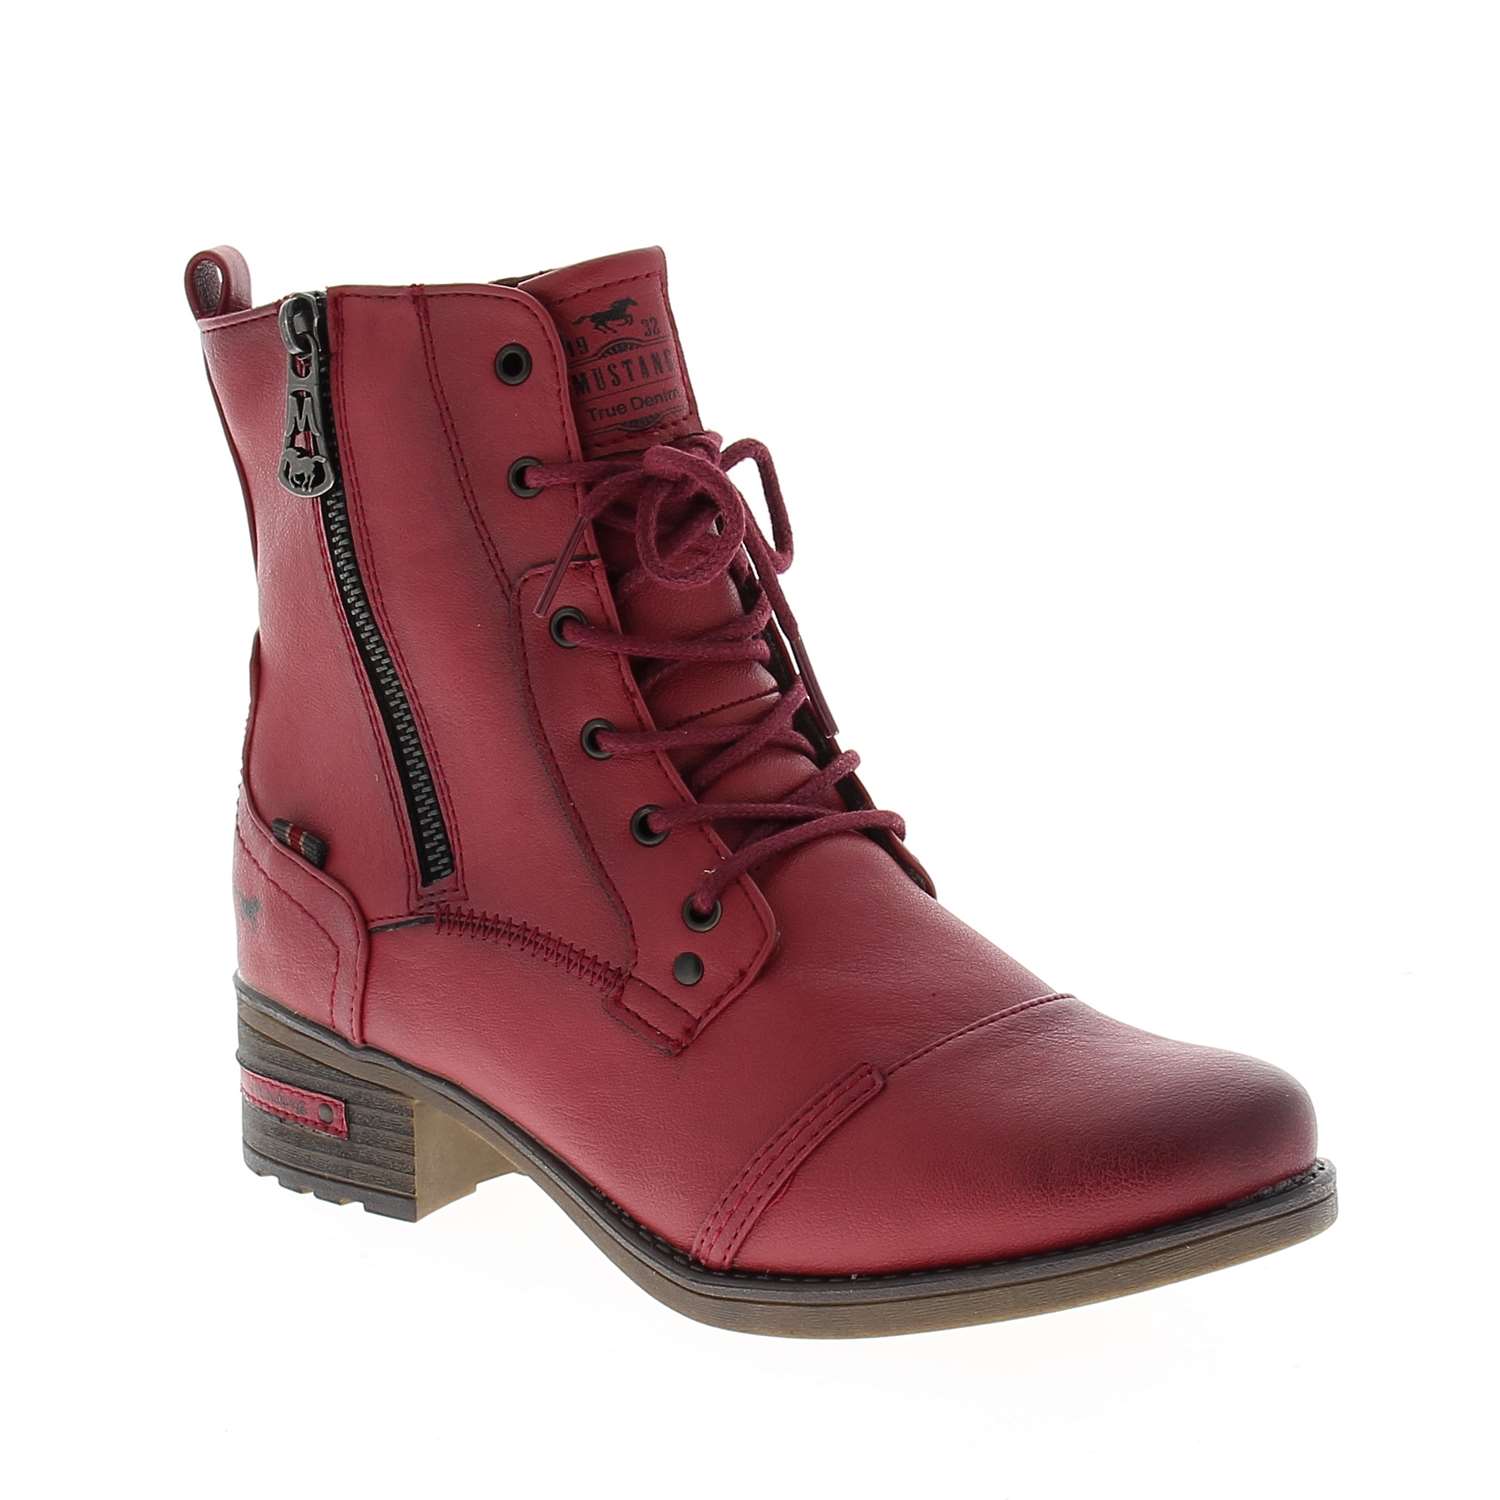 01 - MUNIL - MUSTANG - Boots et bottines - Synthétique